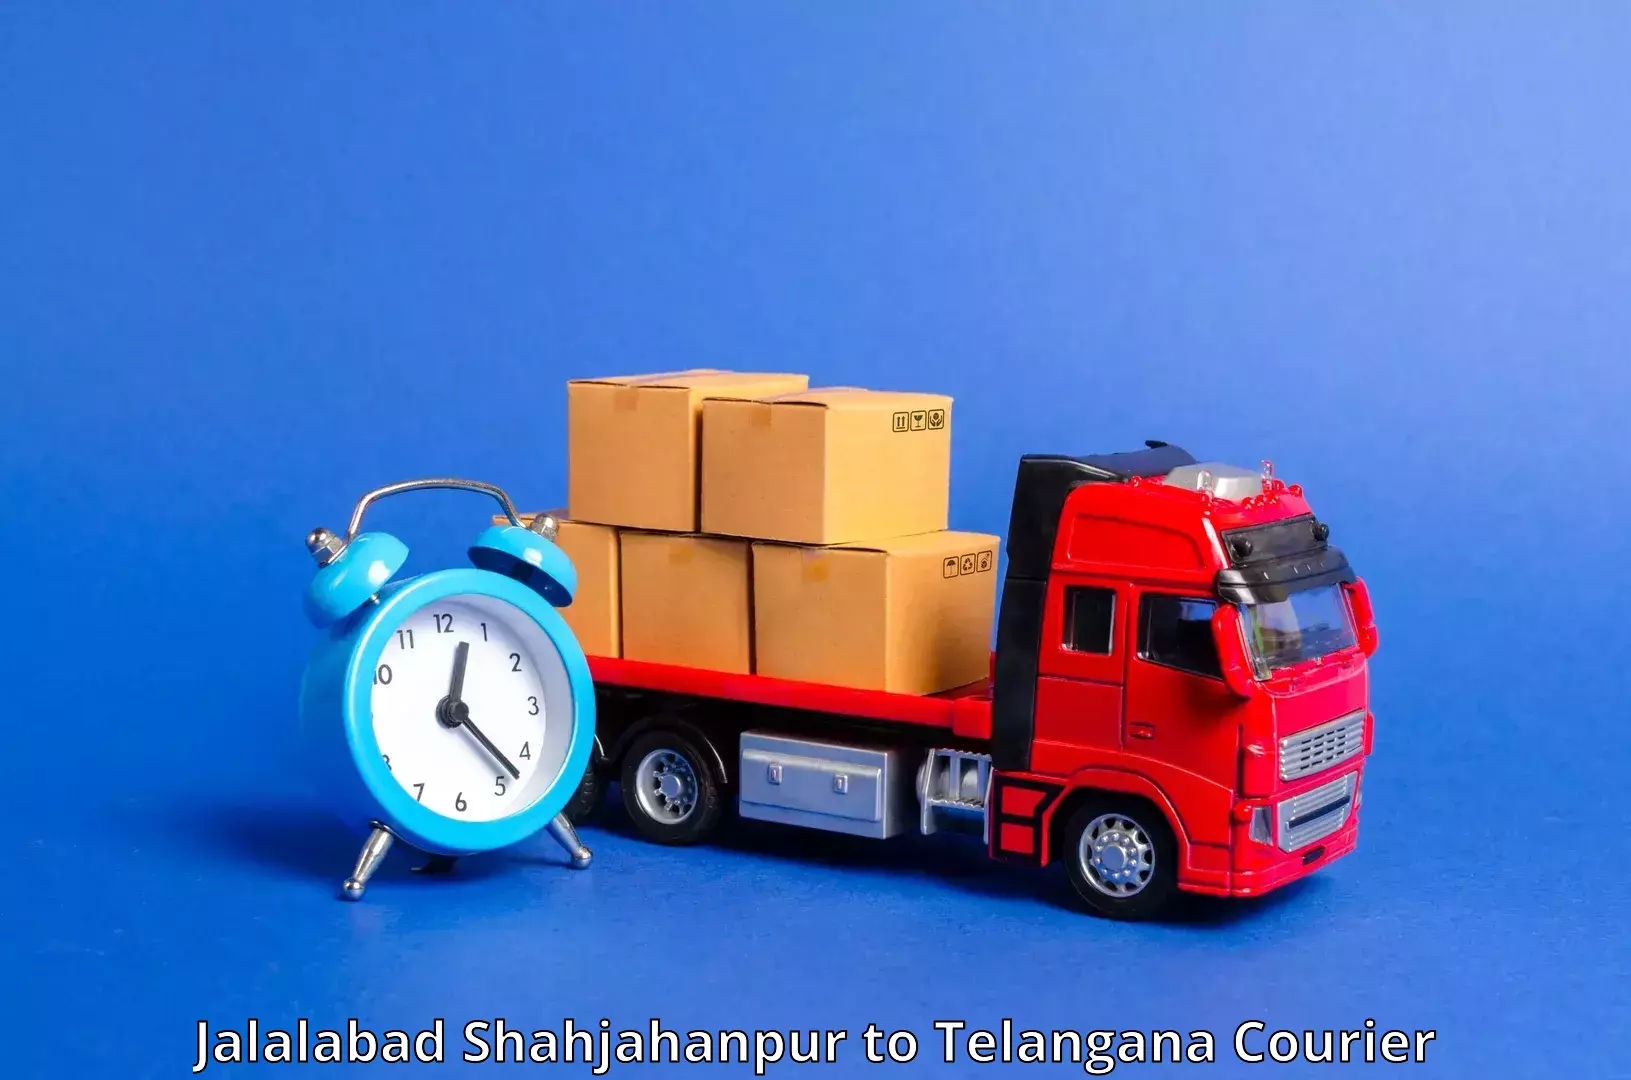 Flexible delivery schedules Jalalabad Shahjahanpur to Amangal